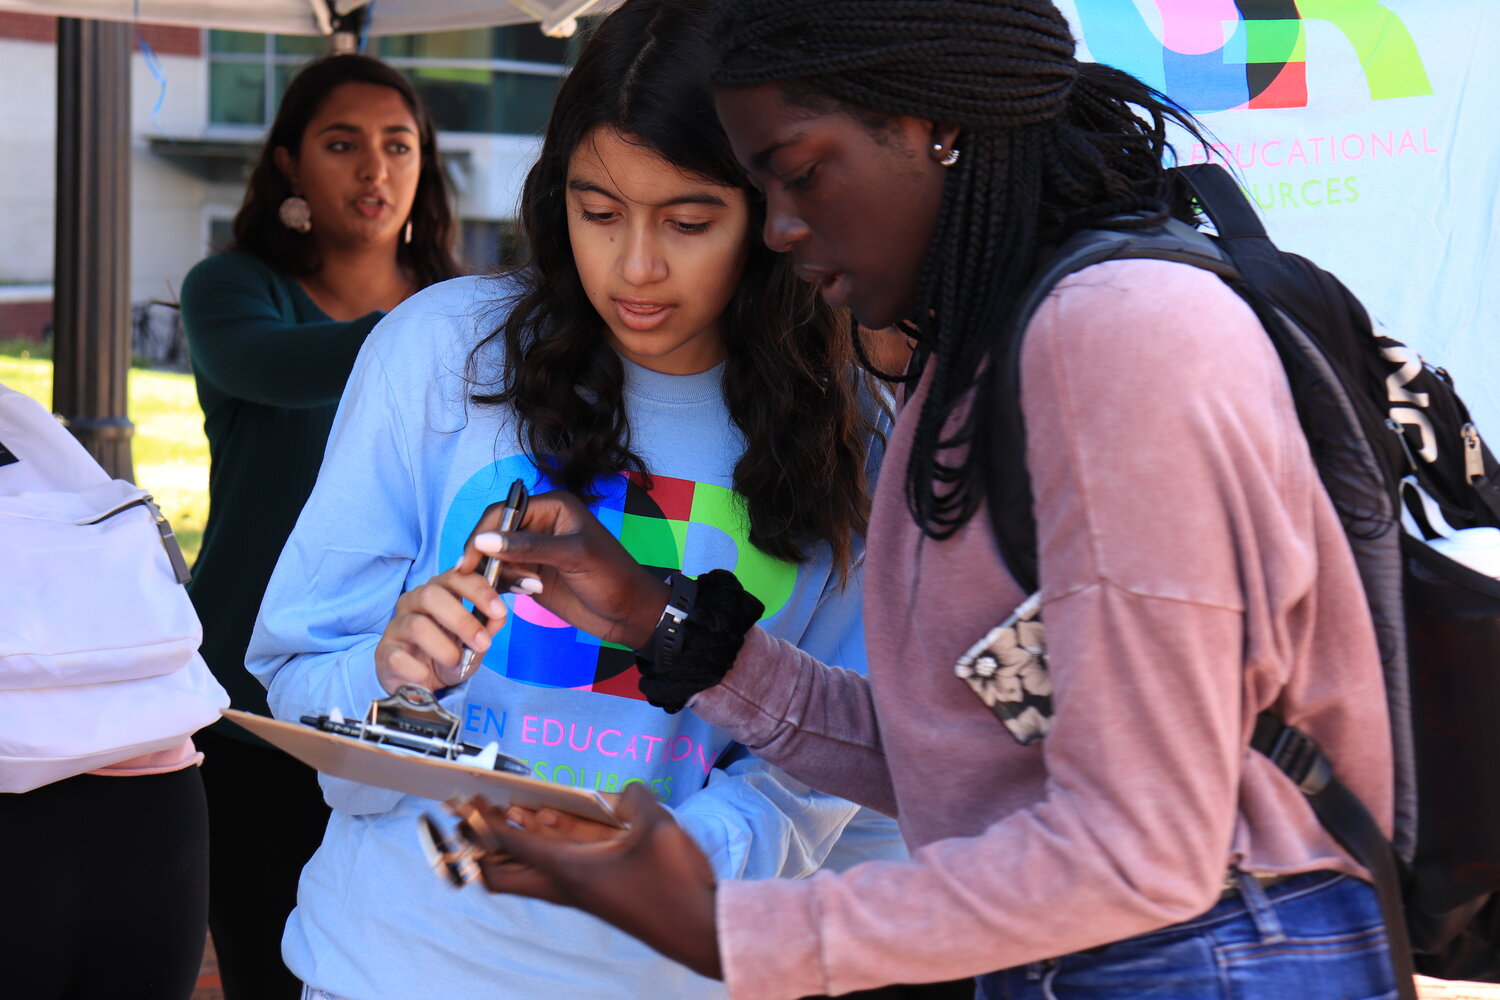 Members of PIRG hand out T-shirts on Fairfield way. Students who passed by their table were asked to complete a survey about how much they paid for textbooks this year.  Photo by Erin Knapp/The Daily Campus